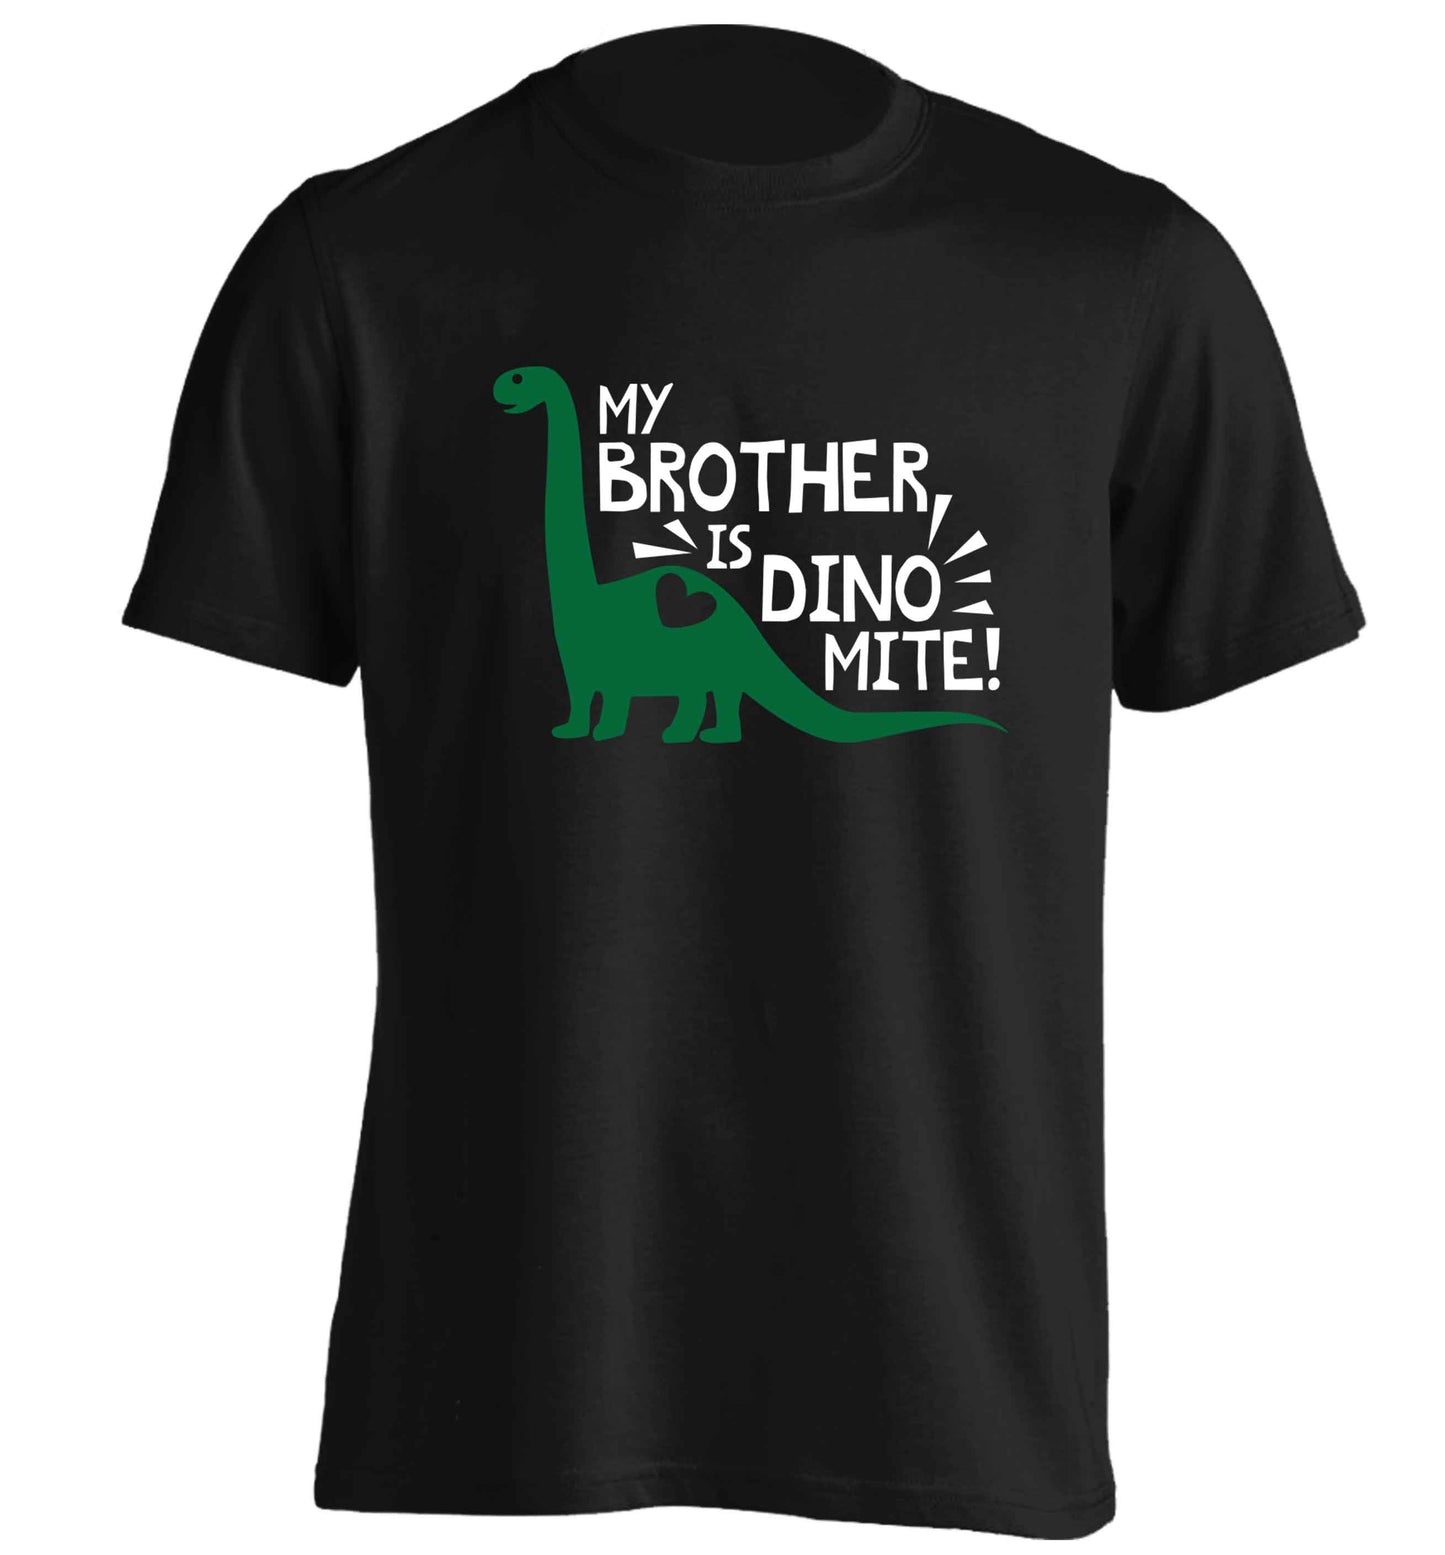 My brother is dinomite! adults unisex black Tshirt 2XL